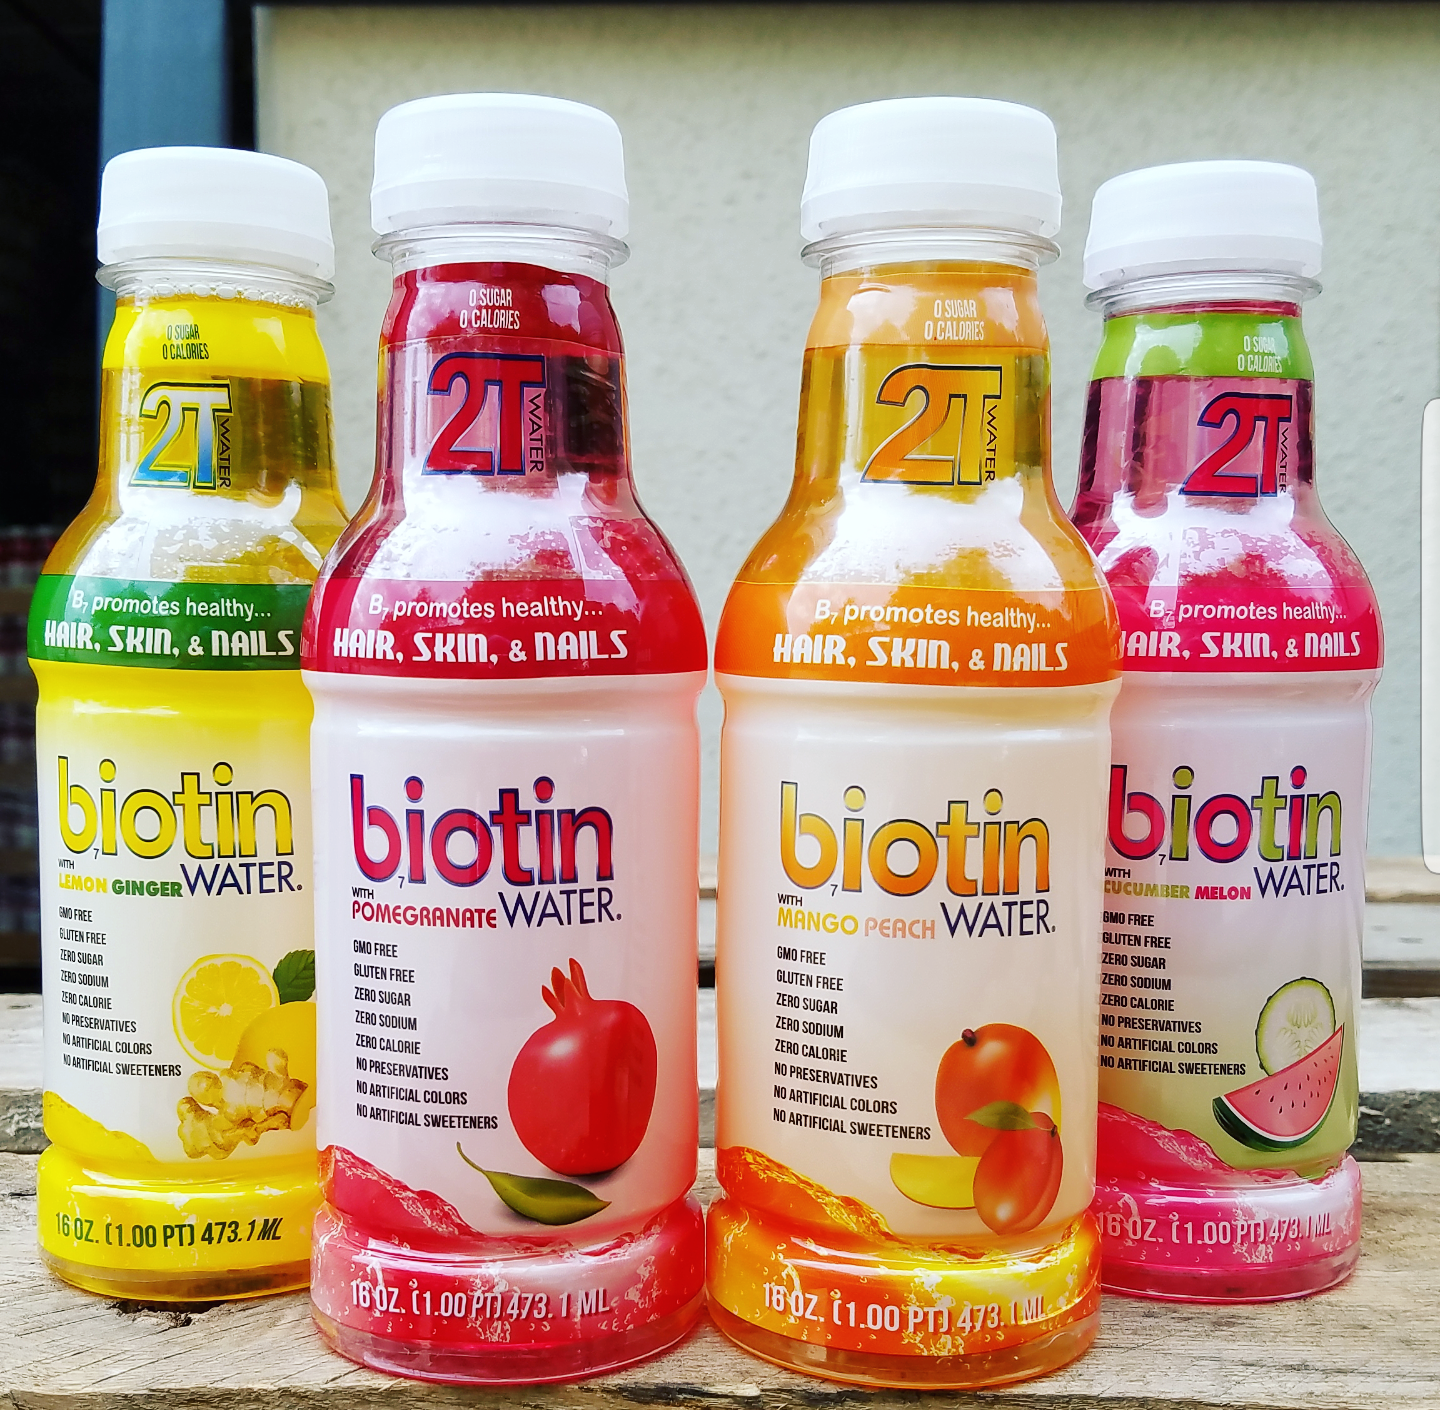 2T Water Introduces New Flavor Cucumber-Melon Biotin Water®